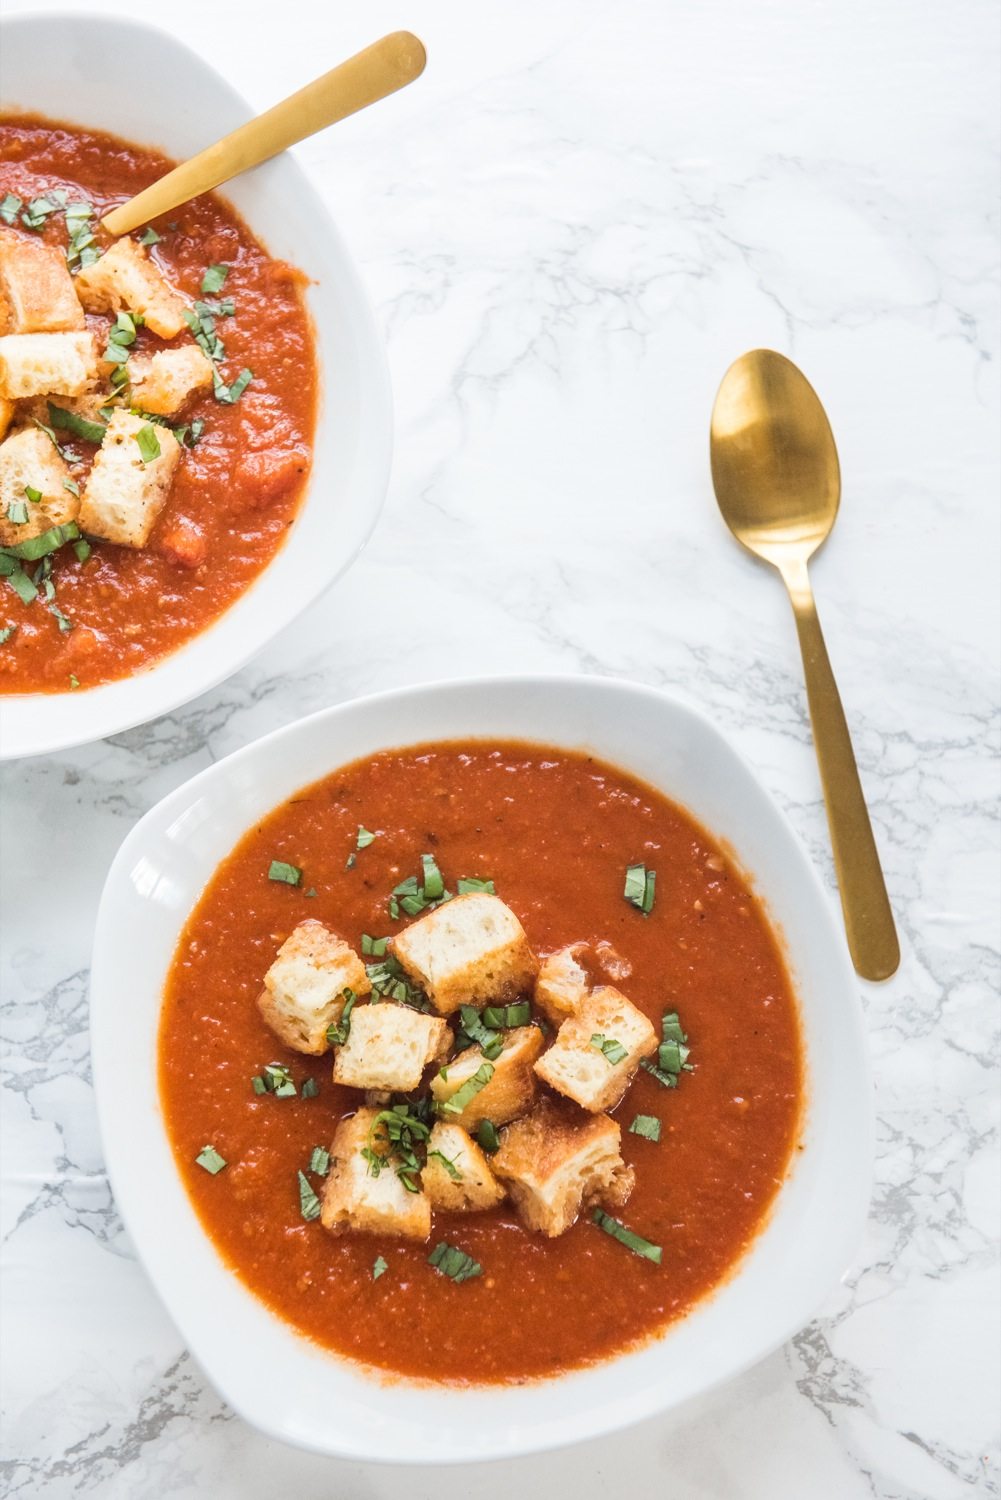 Easy Dinner Recipes: Roasted Tomato Soup with Homemade Croutons